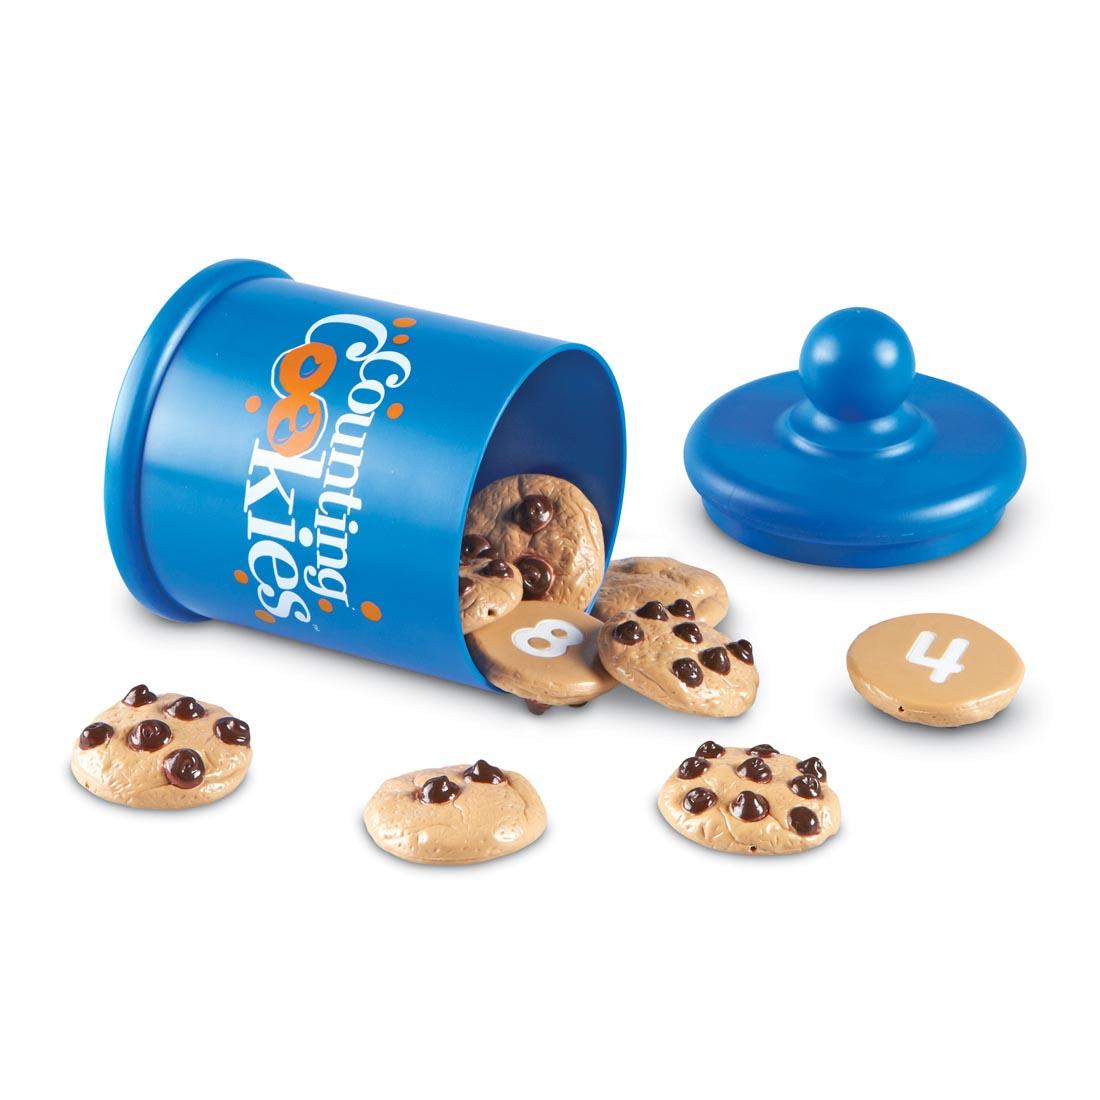 blue cookie jar spilling out plastic chocolate chip cookies that have numbers on the backs